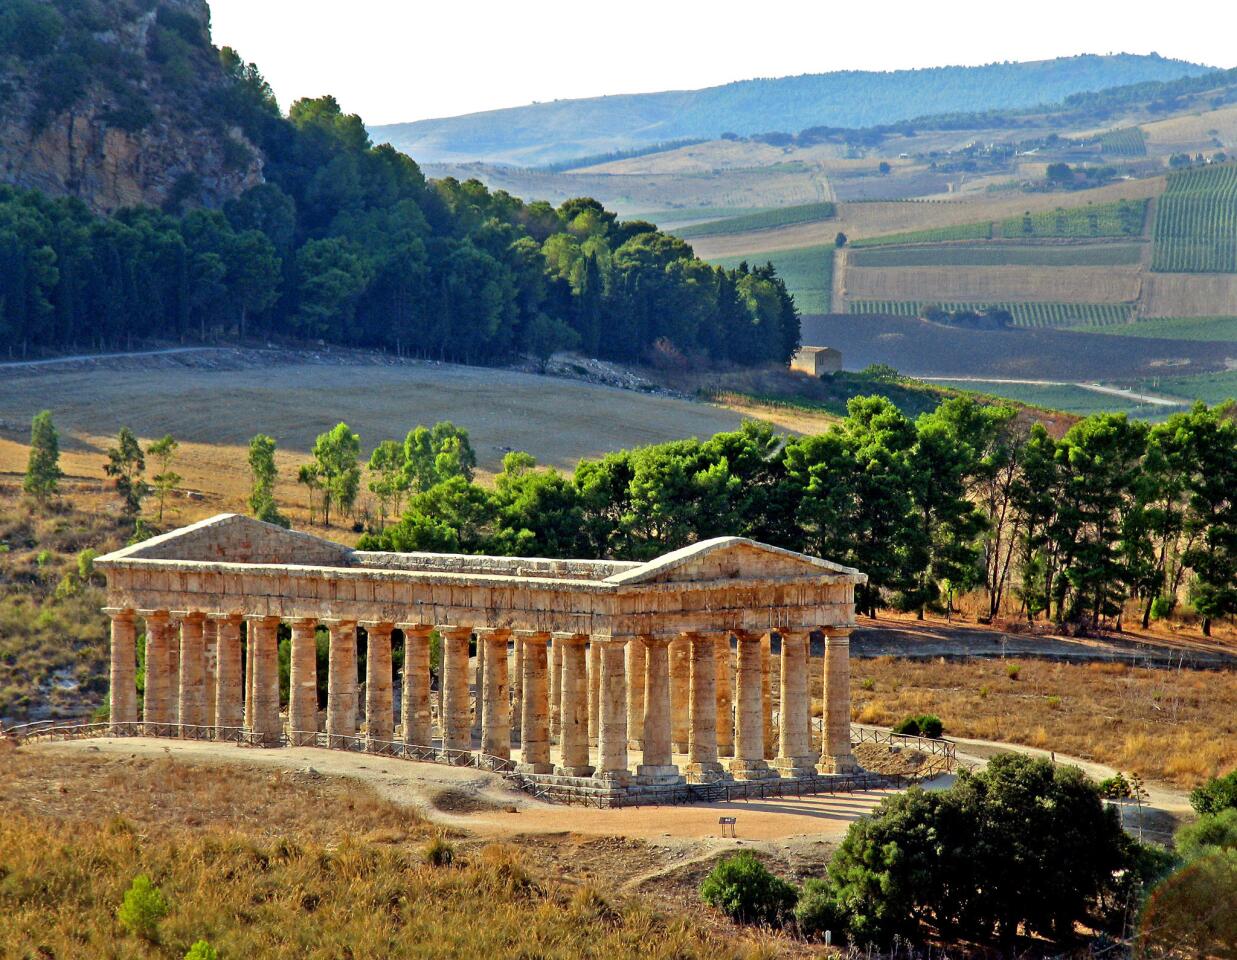 The temple at Segesta, thought to date from the 5th century BC, was built by the ancient Elymians, whose language and origin remain a mystery.